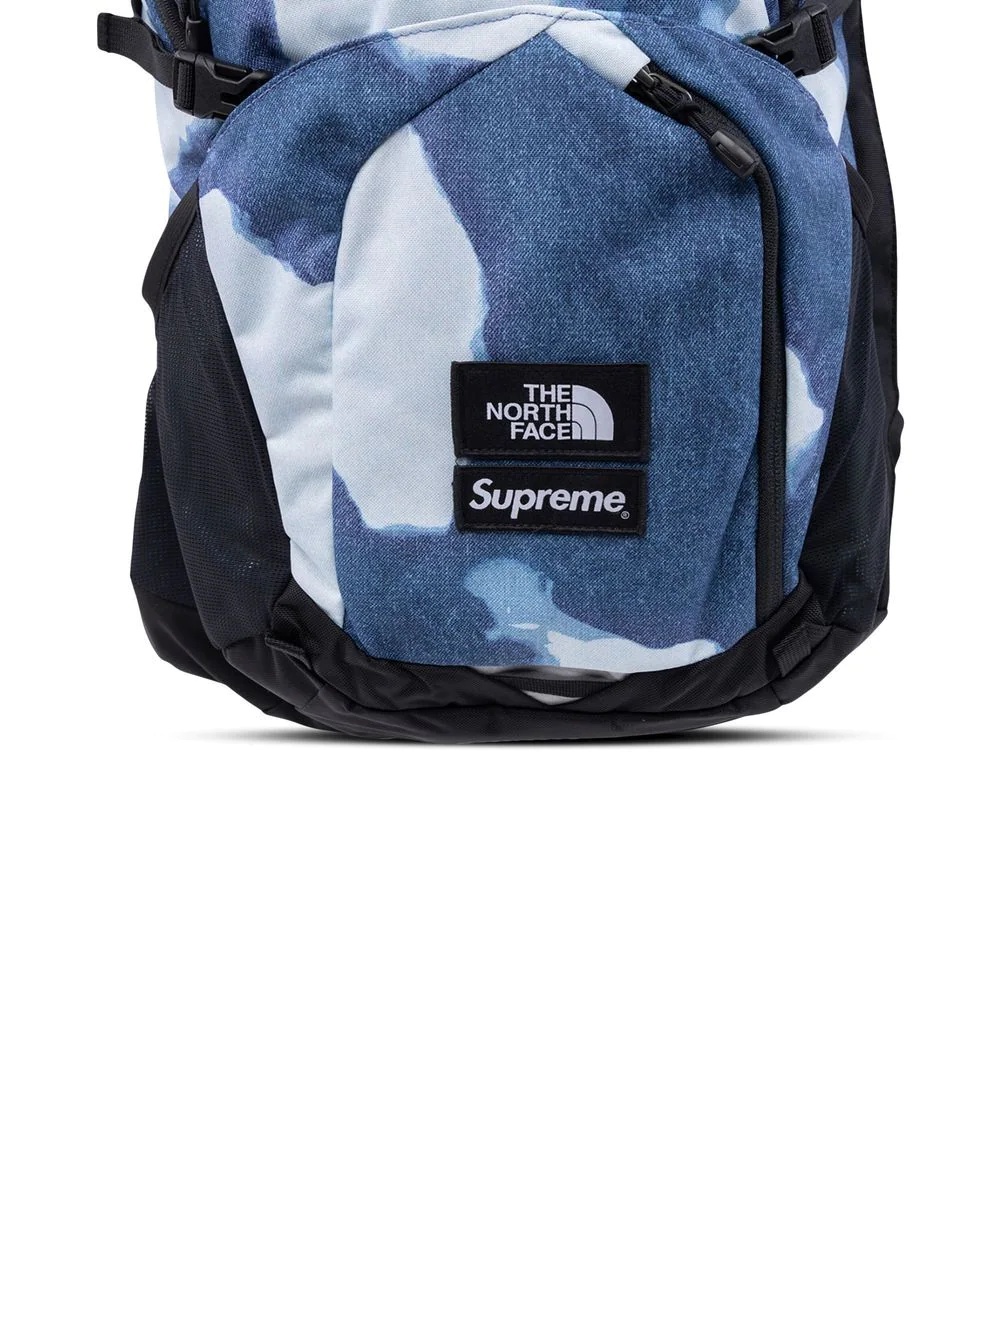 x The North Face bleach-effect Pocono backpack - 3